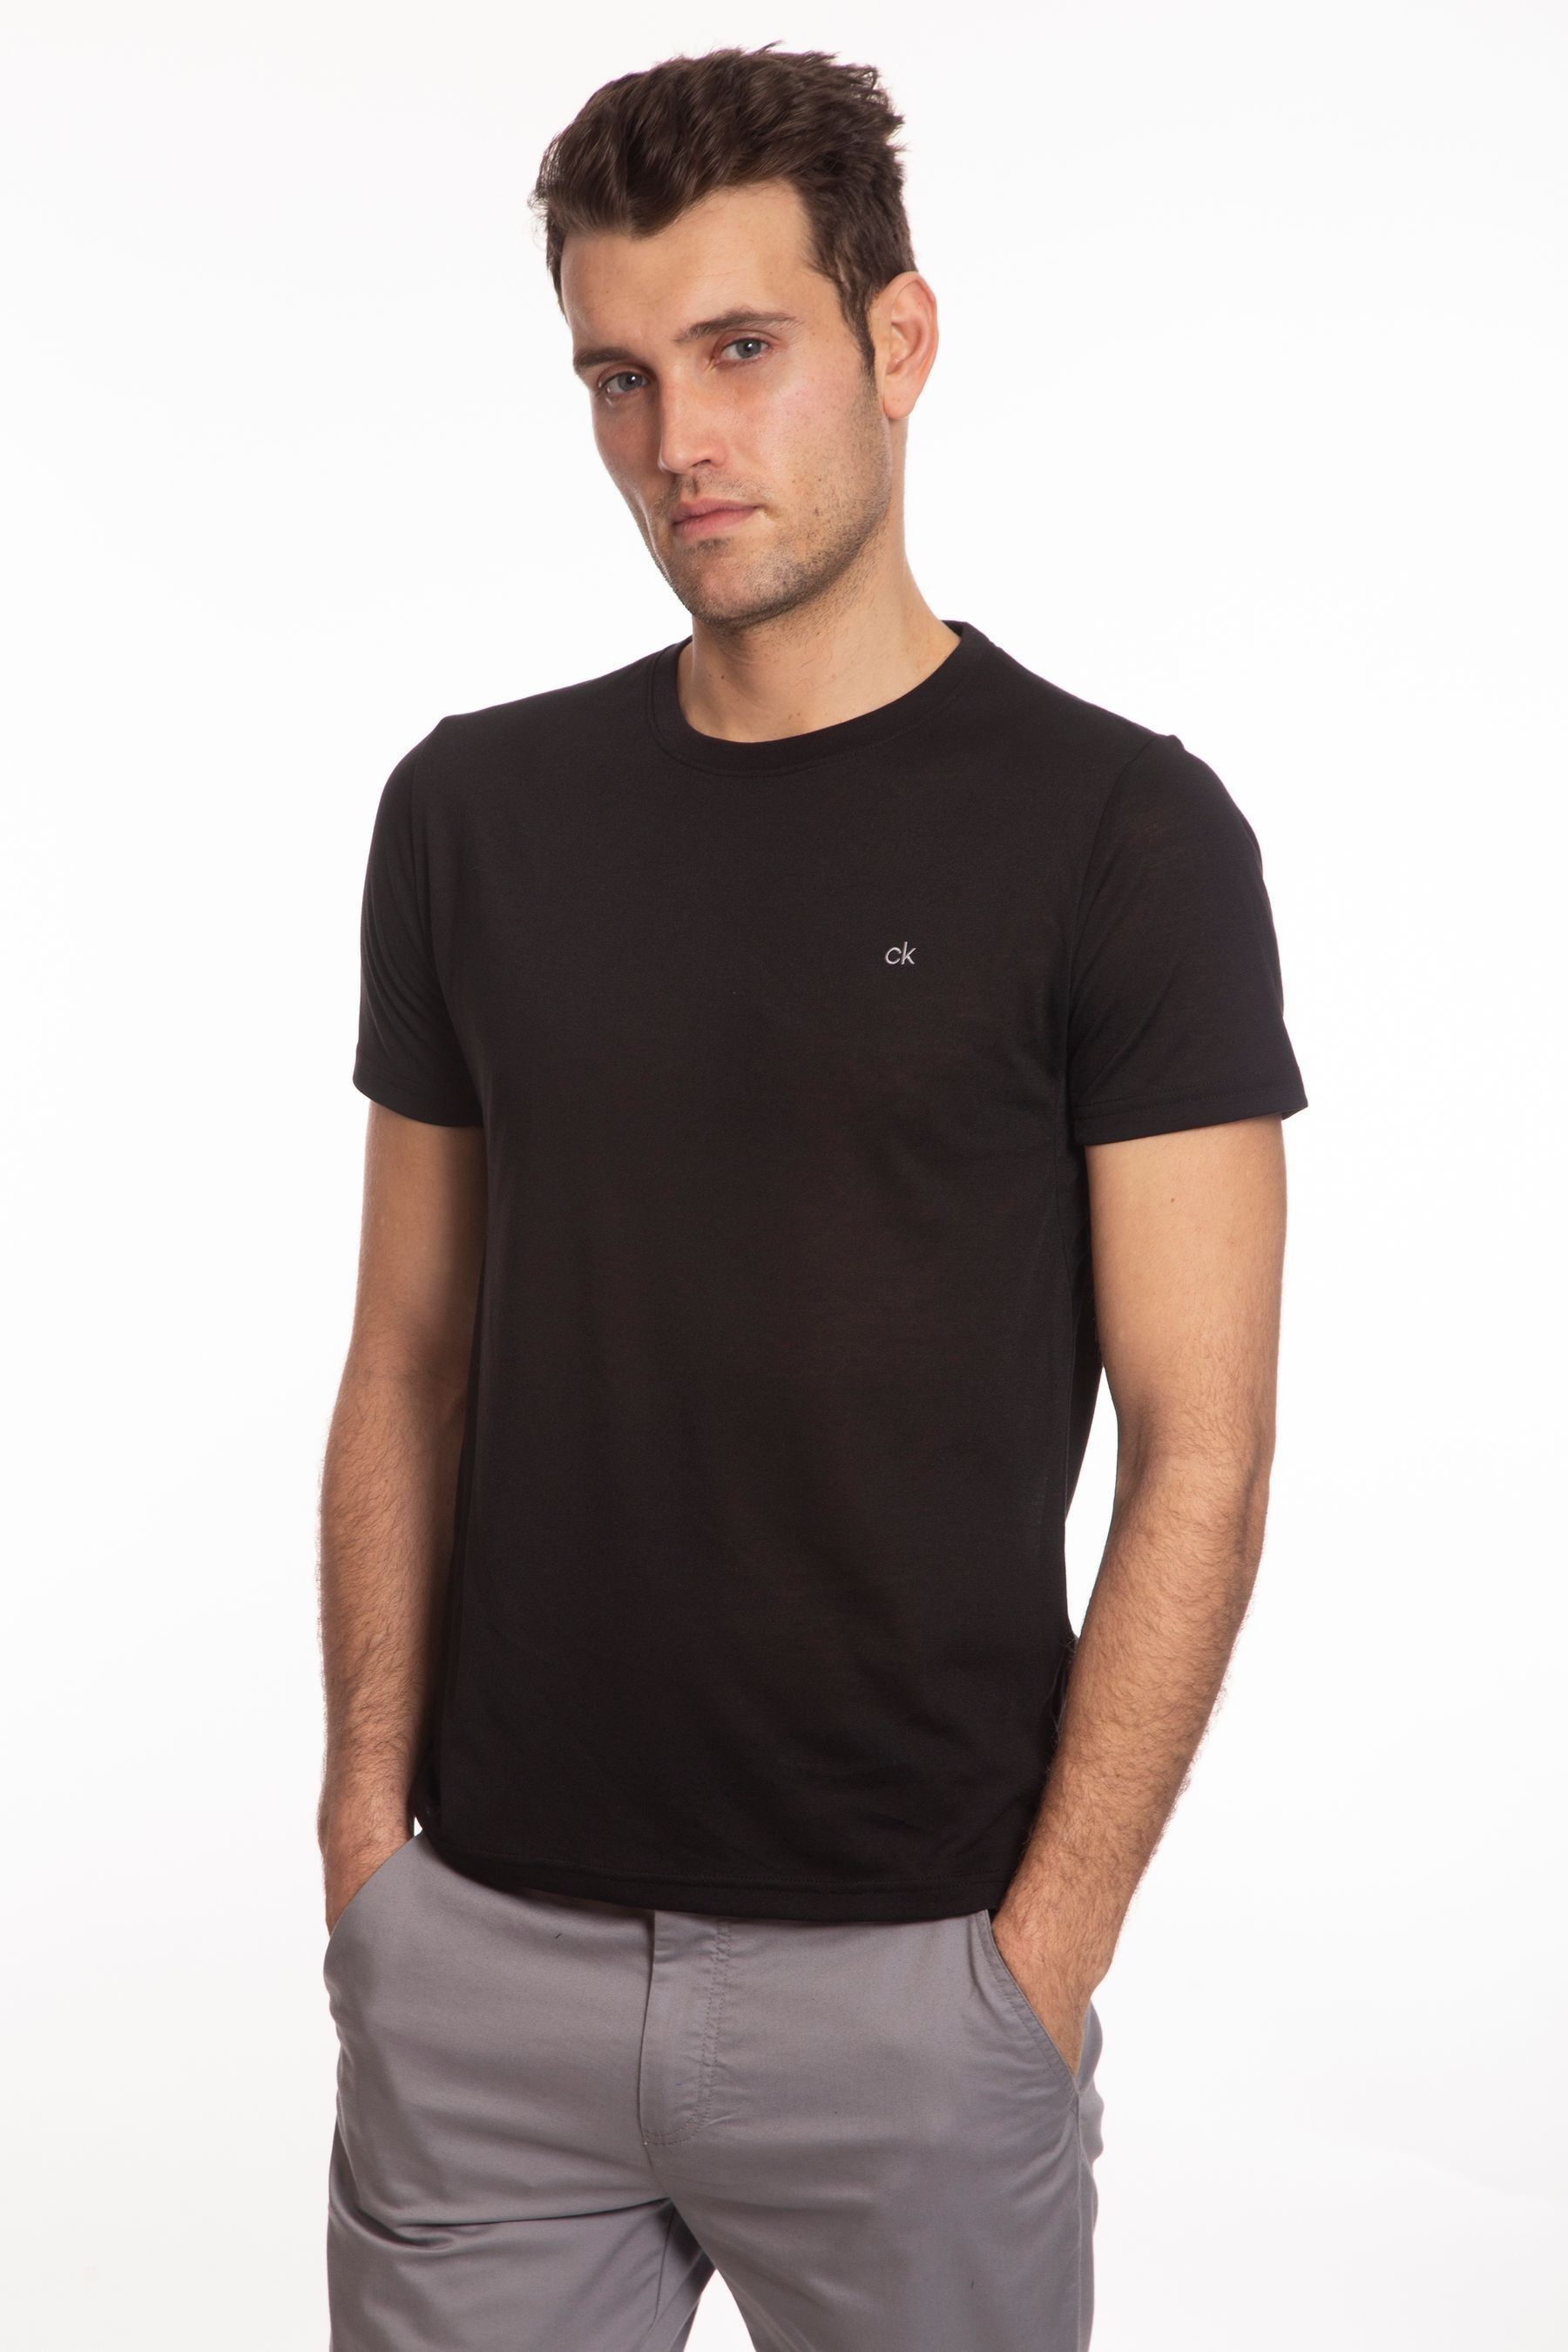 Buy Calvin Klein Golf White T-Shirts 3 Pack from the Next UK online shop